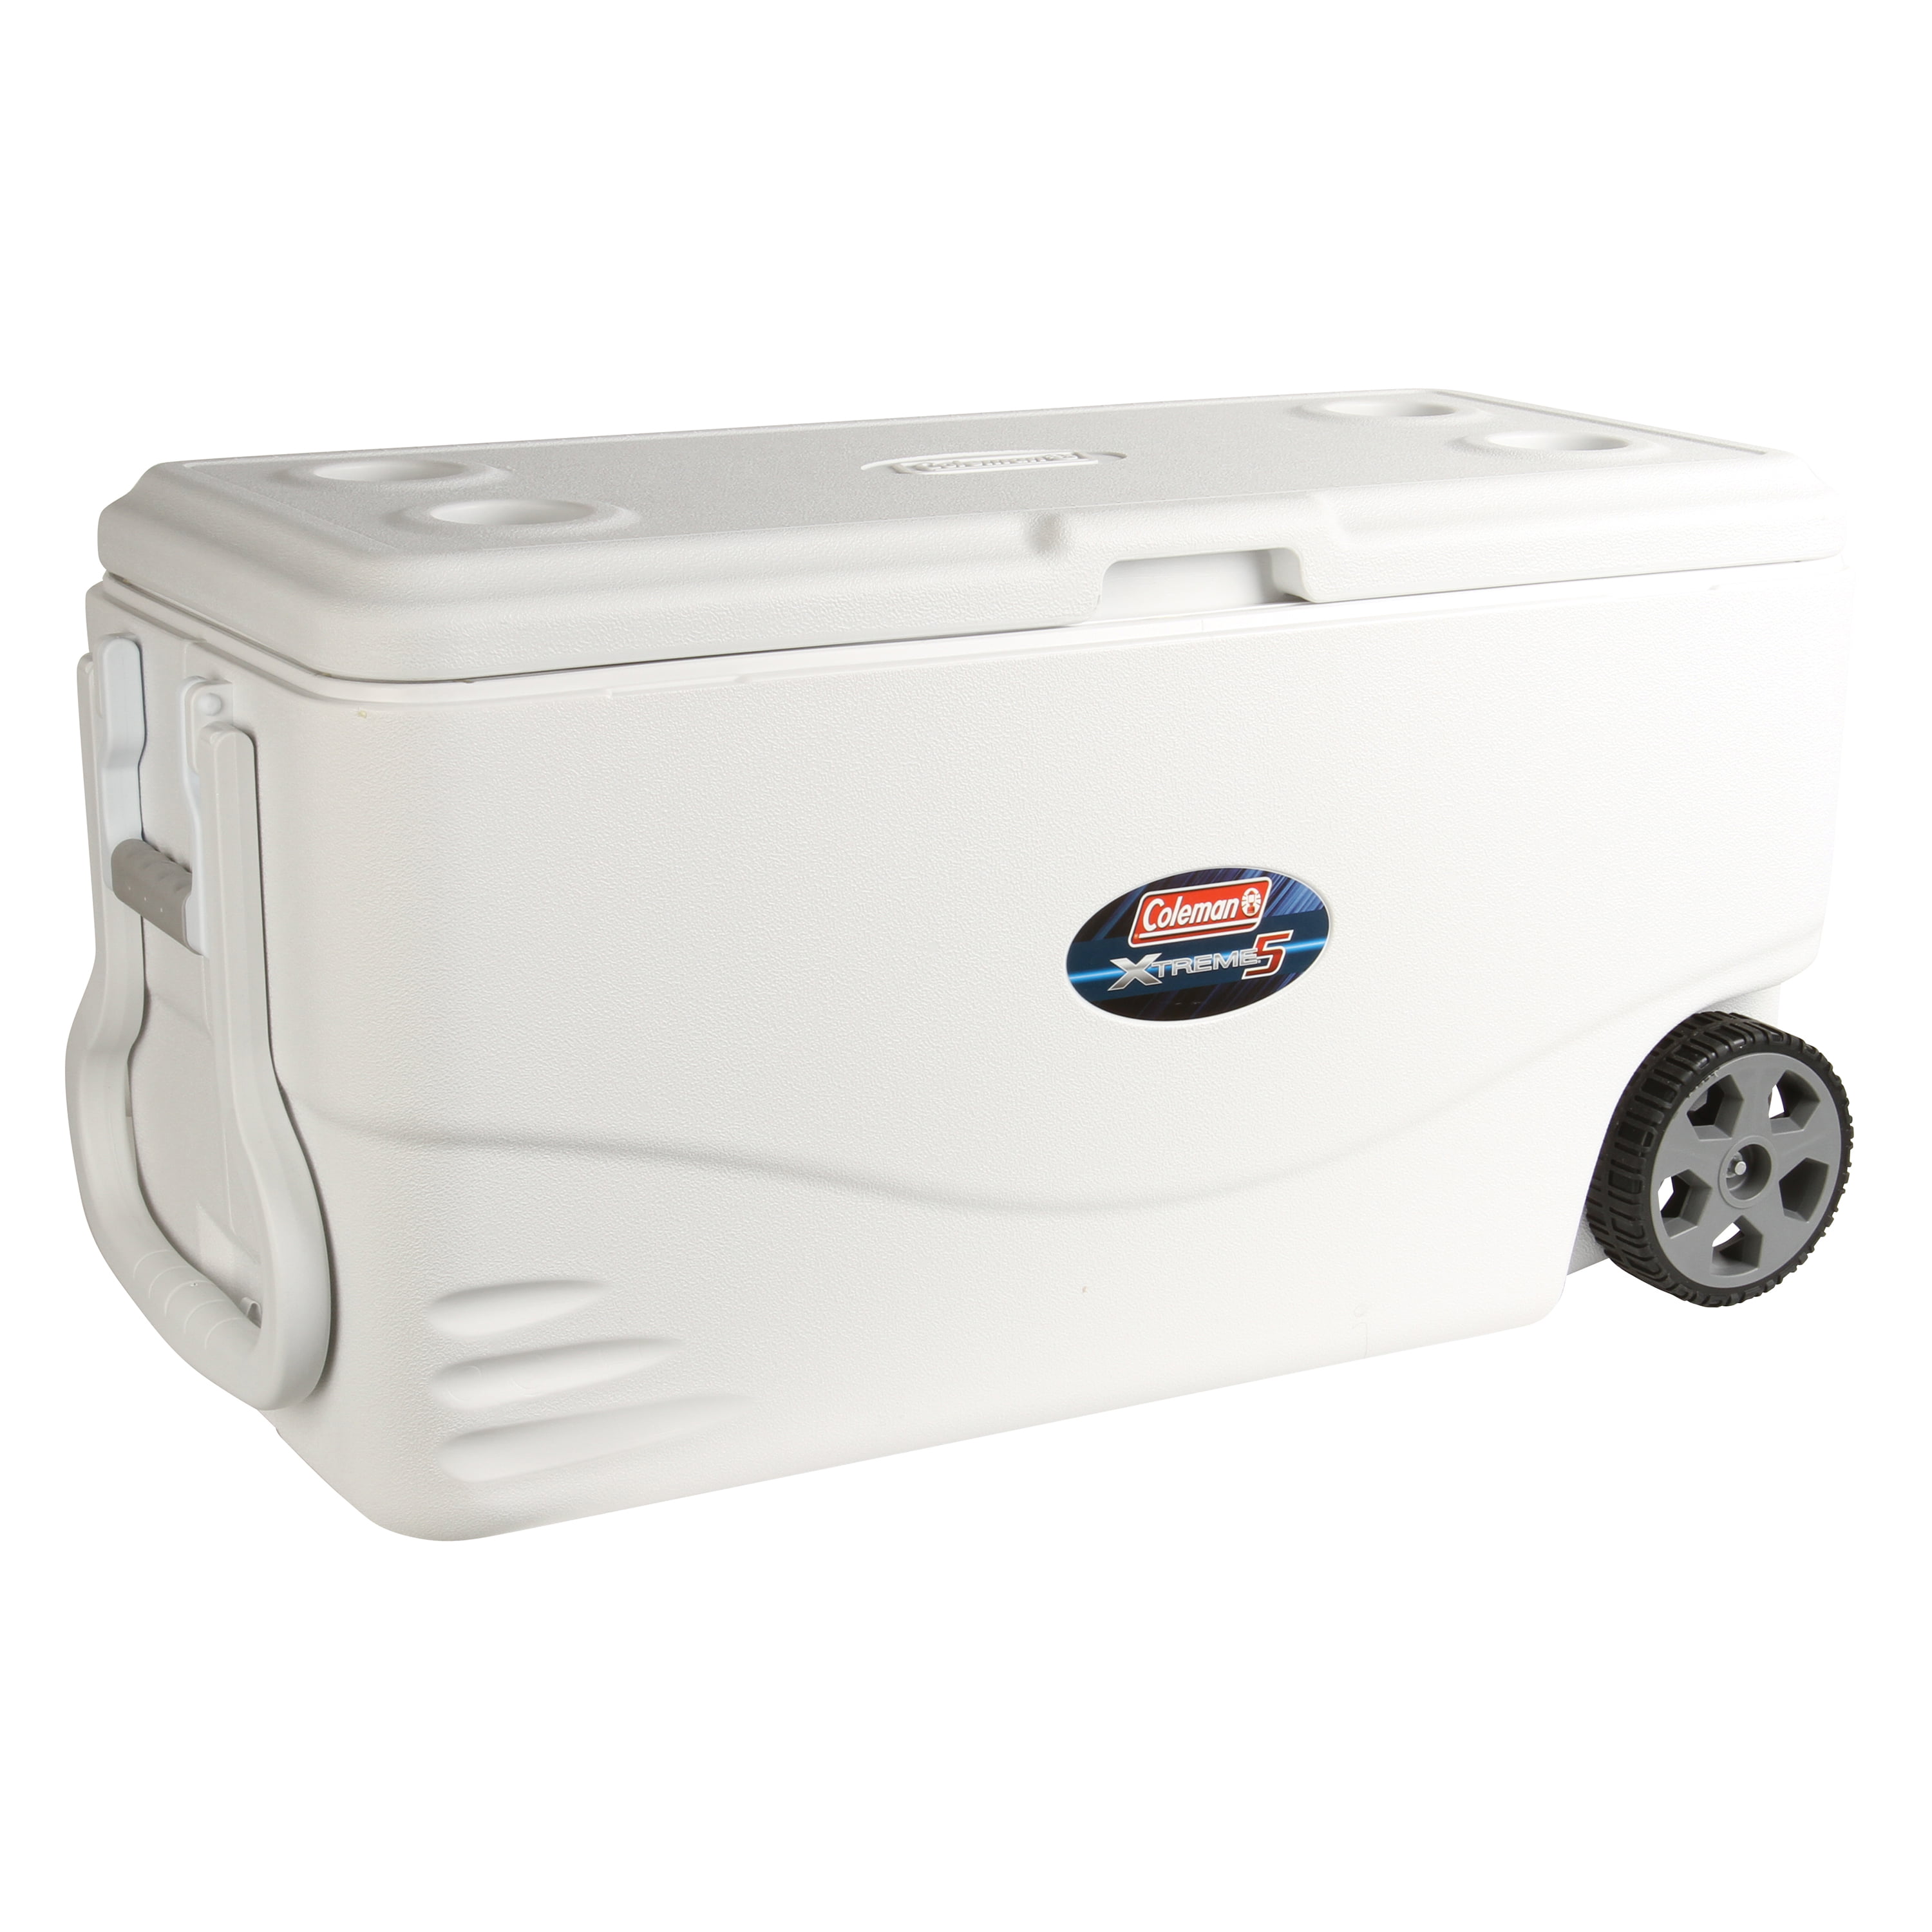 Coleman 100Qt Xtreme 5 Day Heavy Duty Wheeled Cooler, White